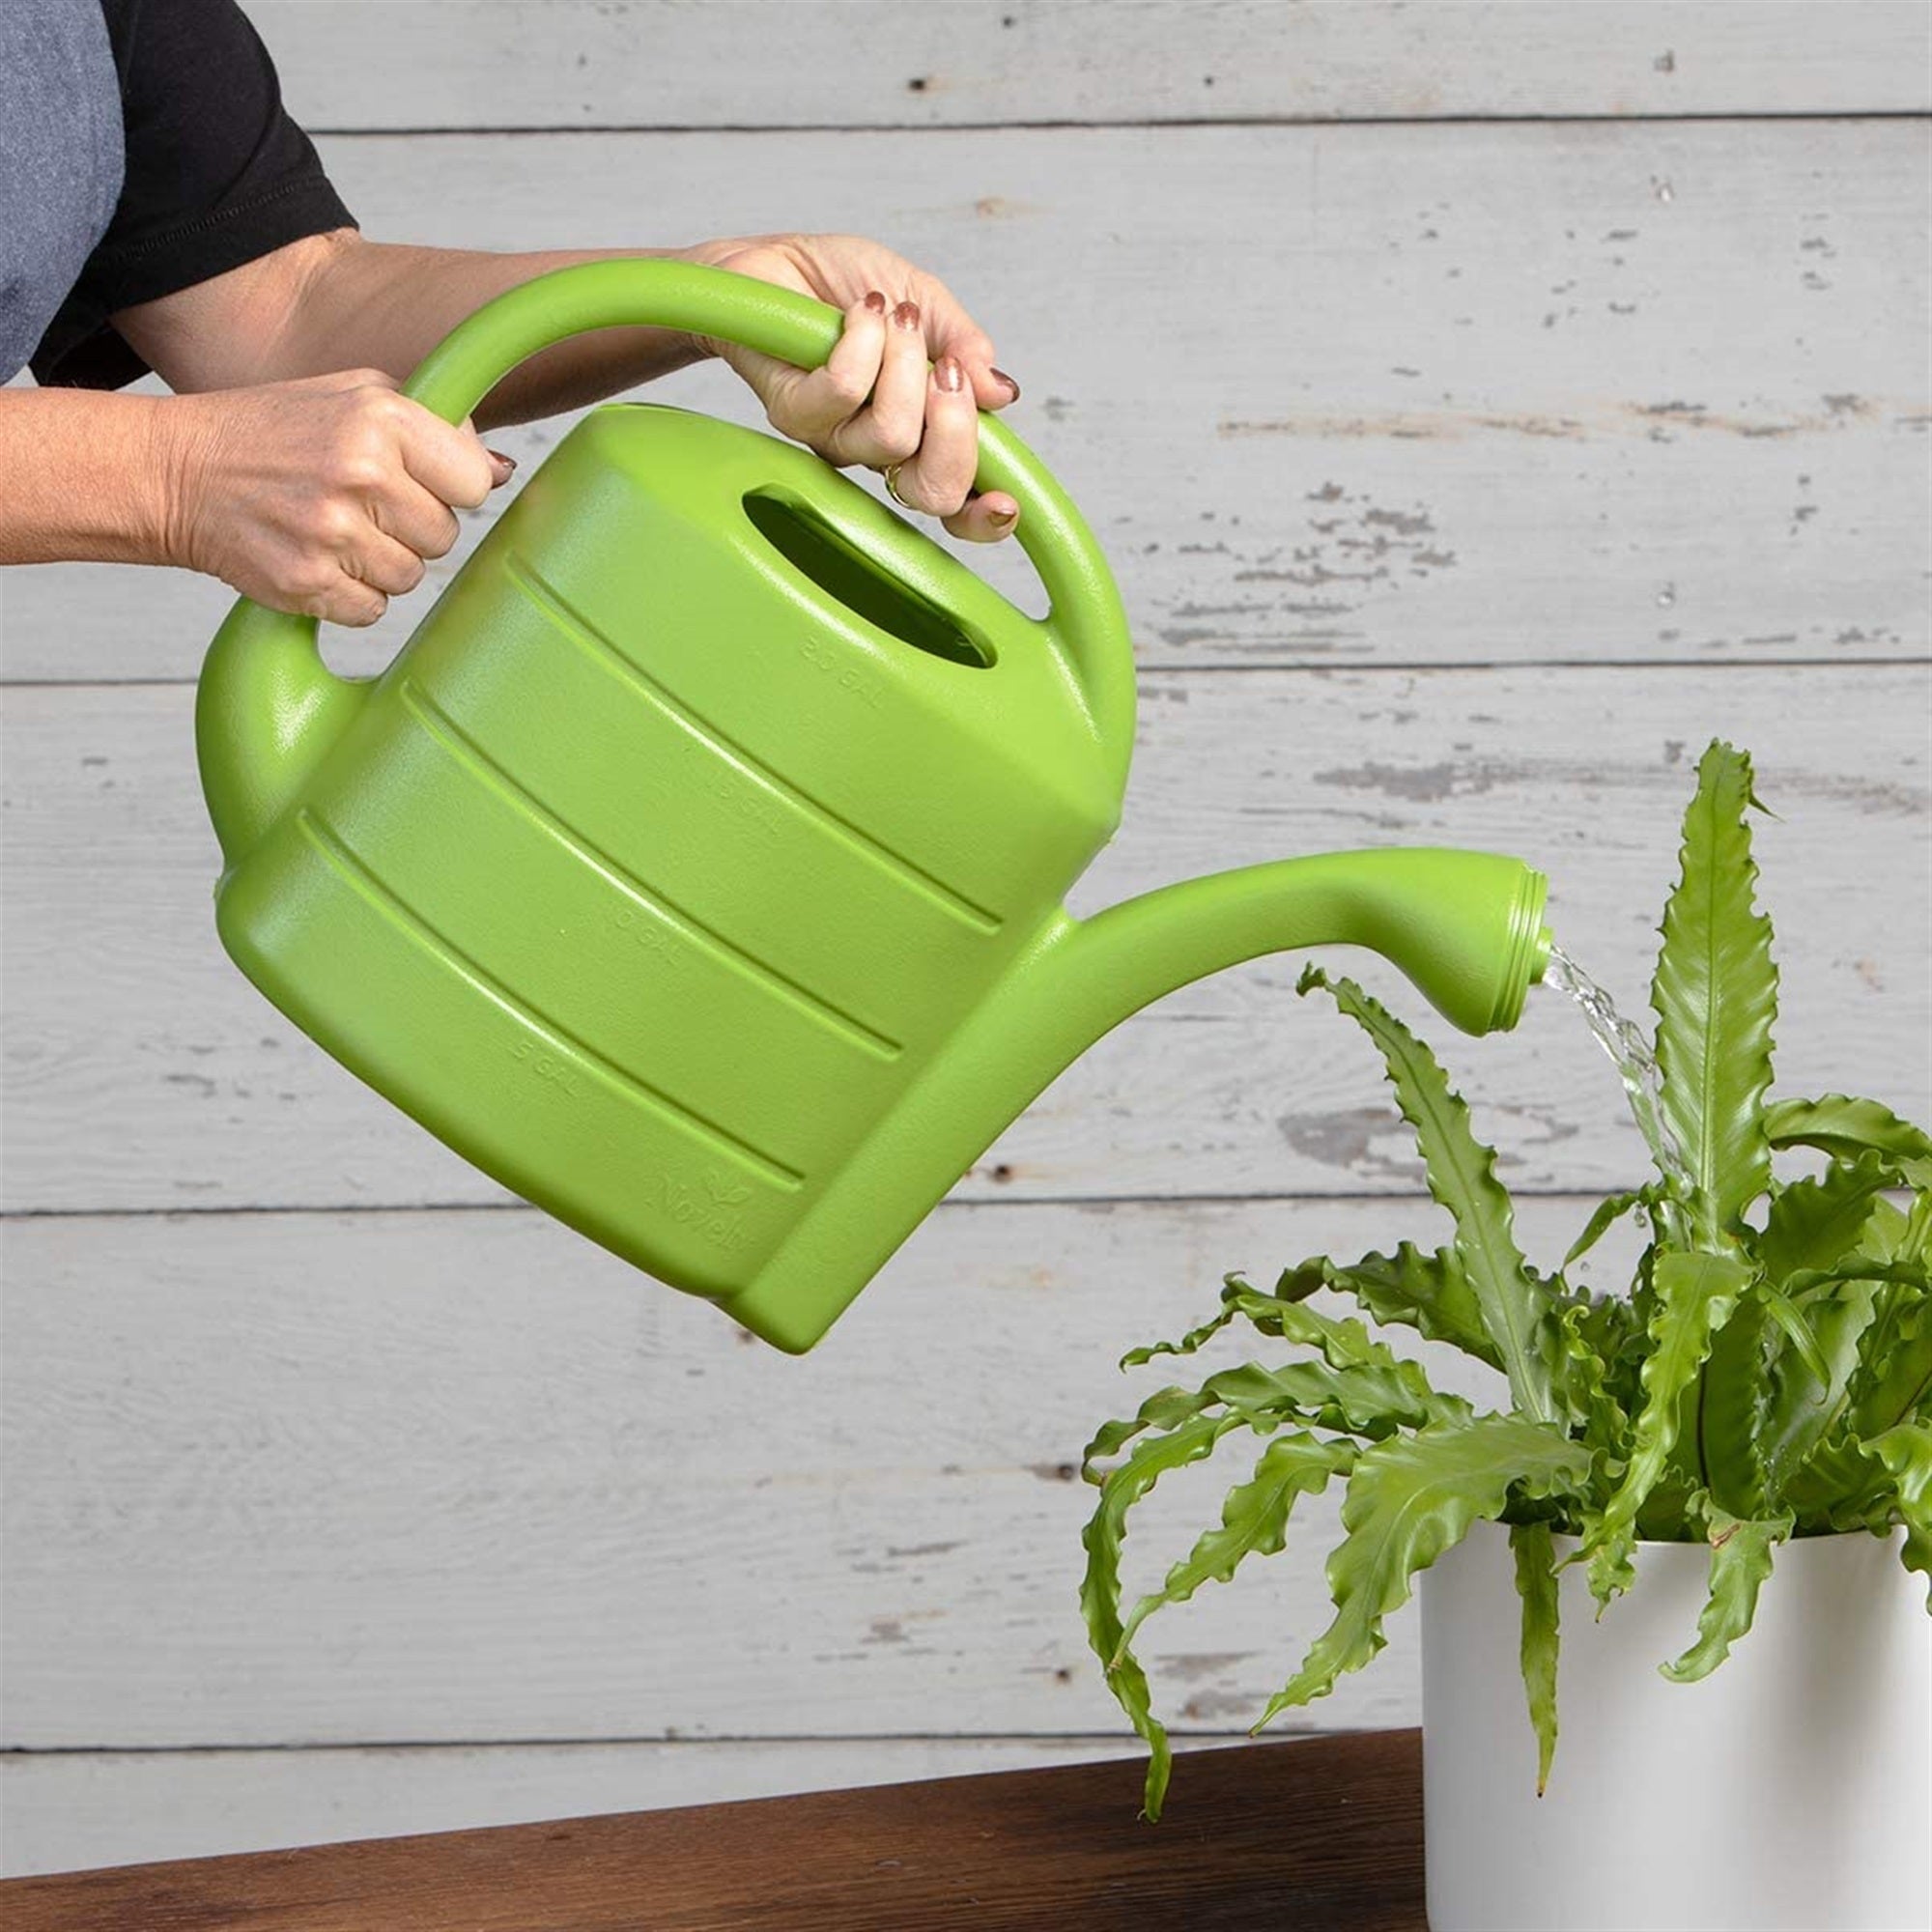 Novelty Plastic Deluxe Watering Can, Green, 2 Gallons